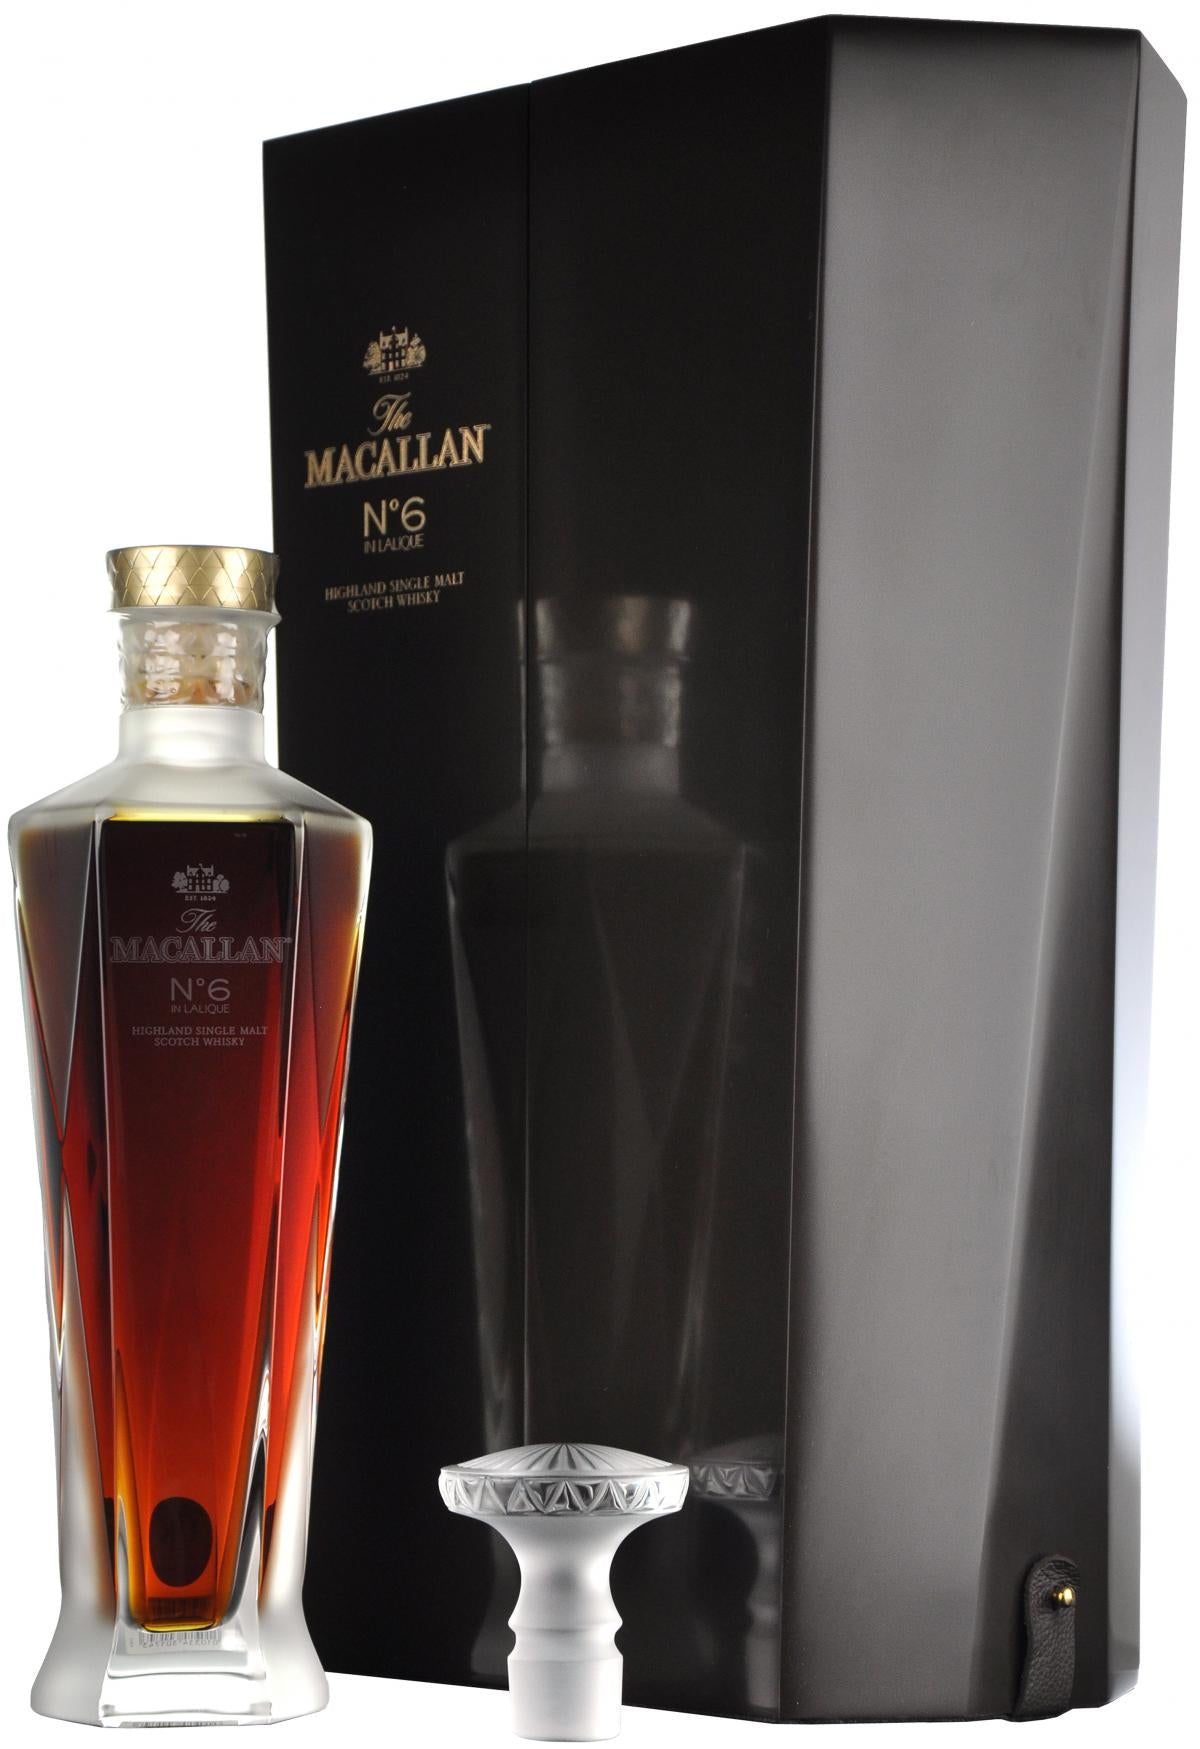 macallan number 6, lalique decanter, speyside single malt scotch whisky,